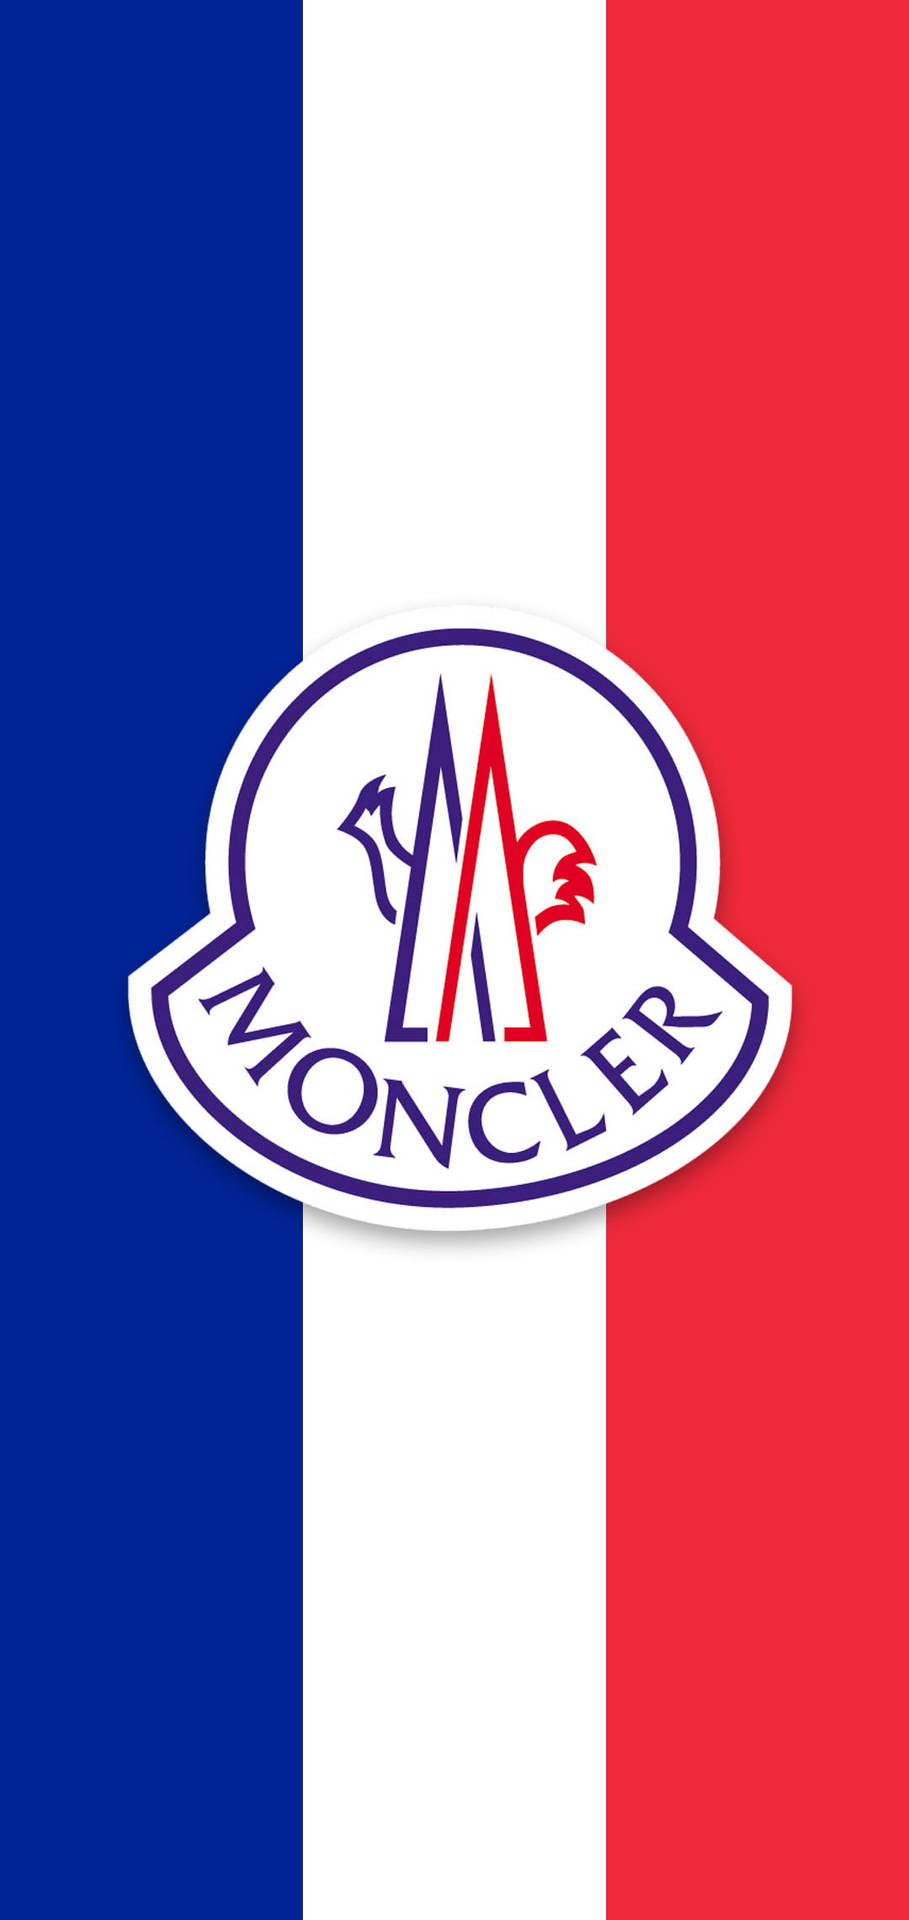 Top 999+ Moncler Wallpaper Full HD, 4K Free to Use